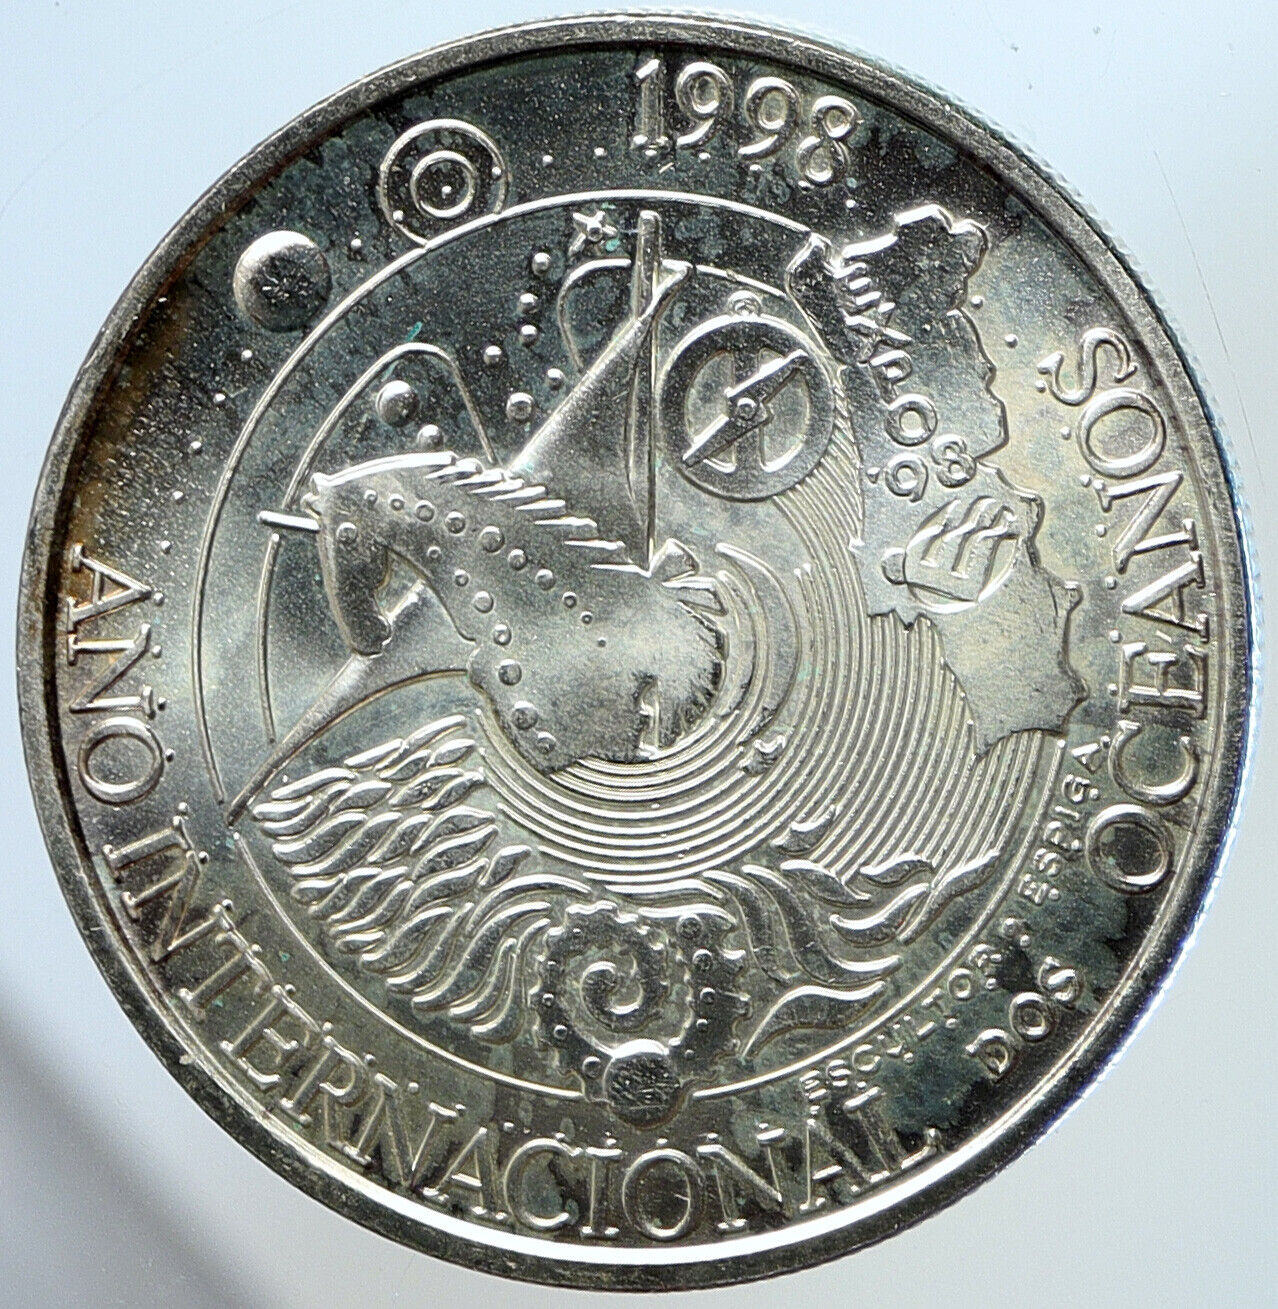 1998 PORTUGAL Exposition 98 Oceans OLD LARGE Silver 1000 Escudos Coin i113193